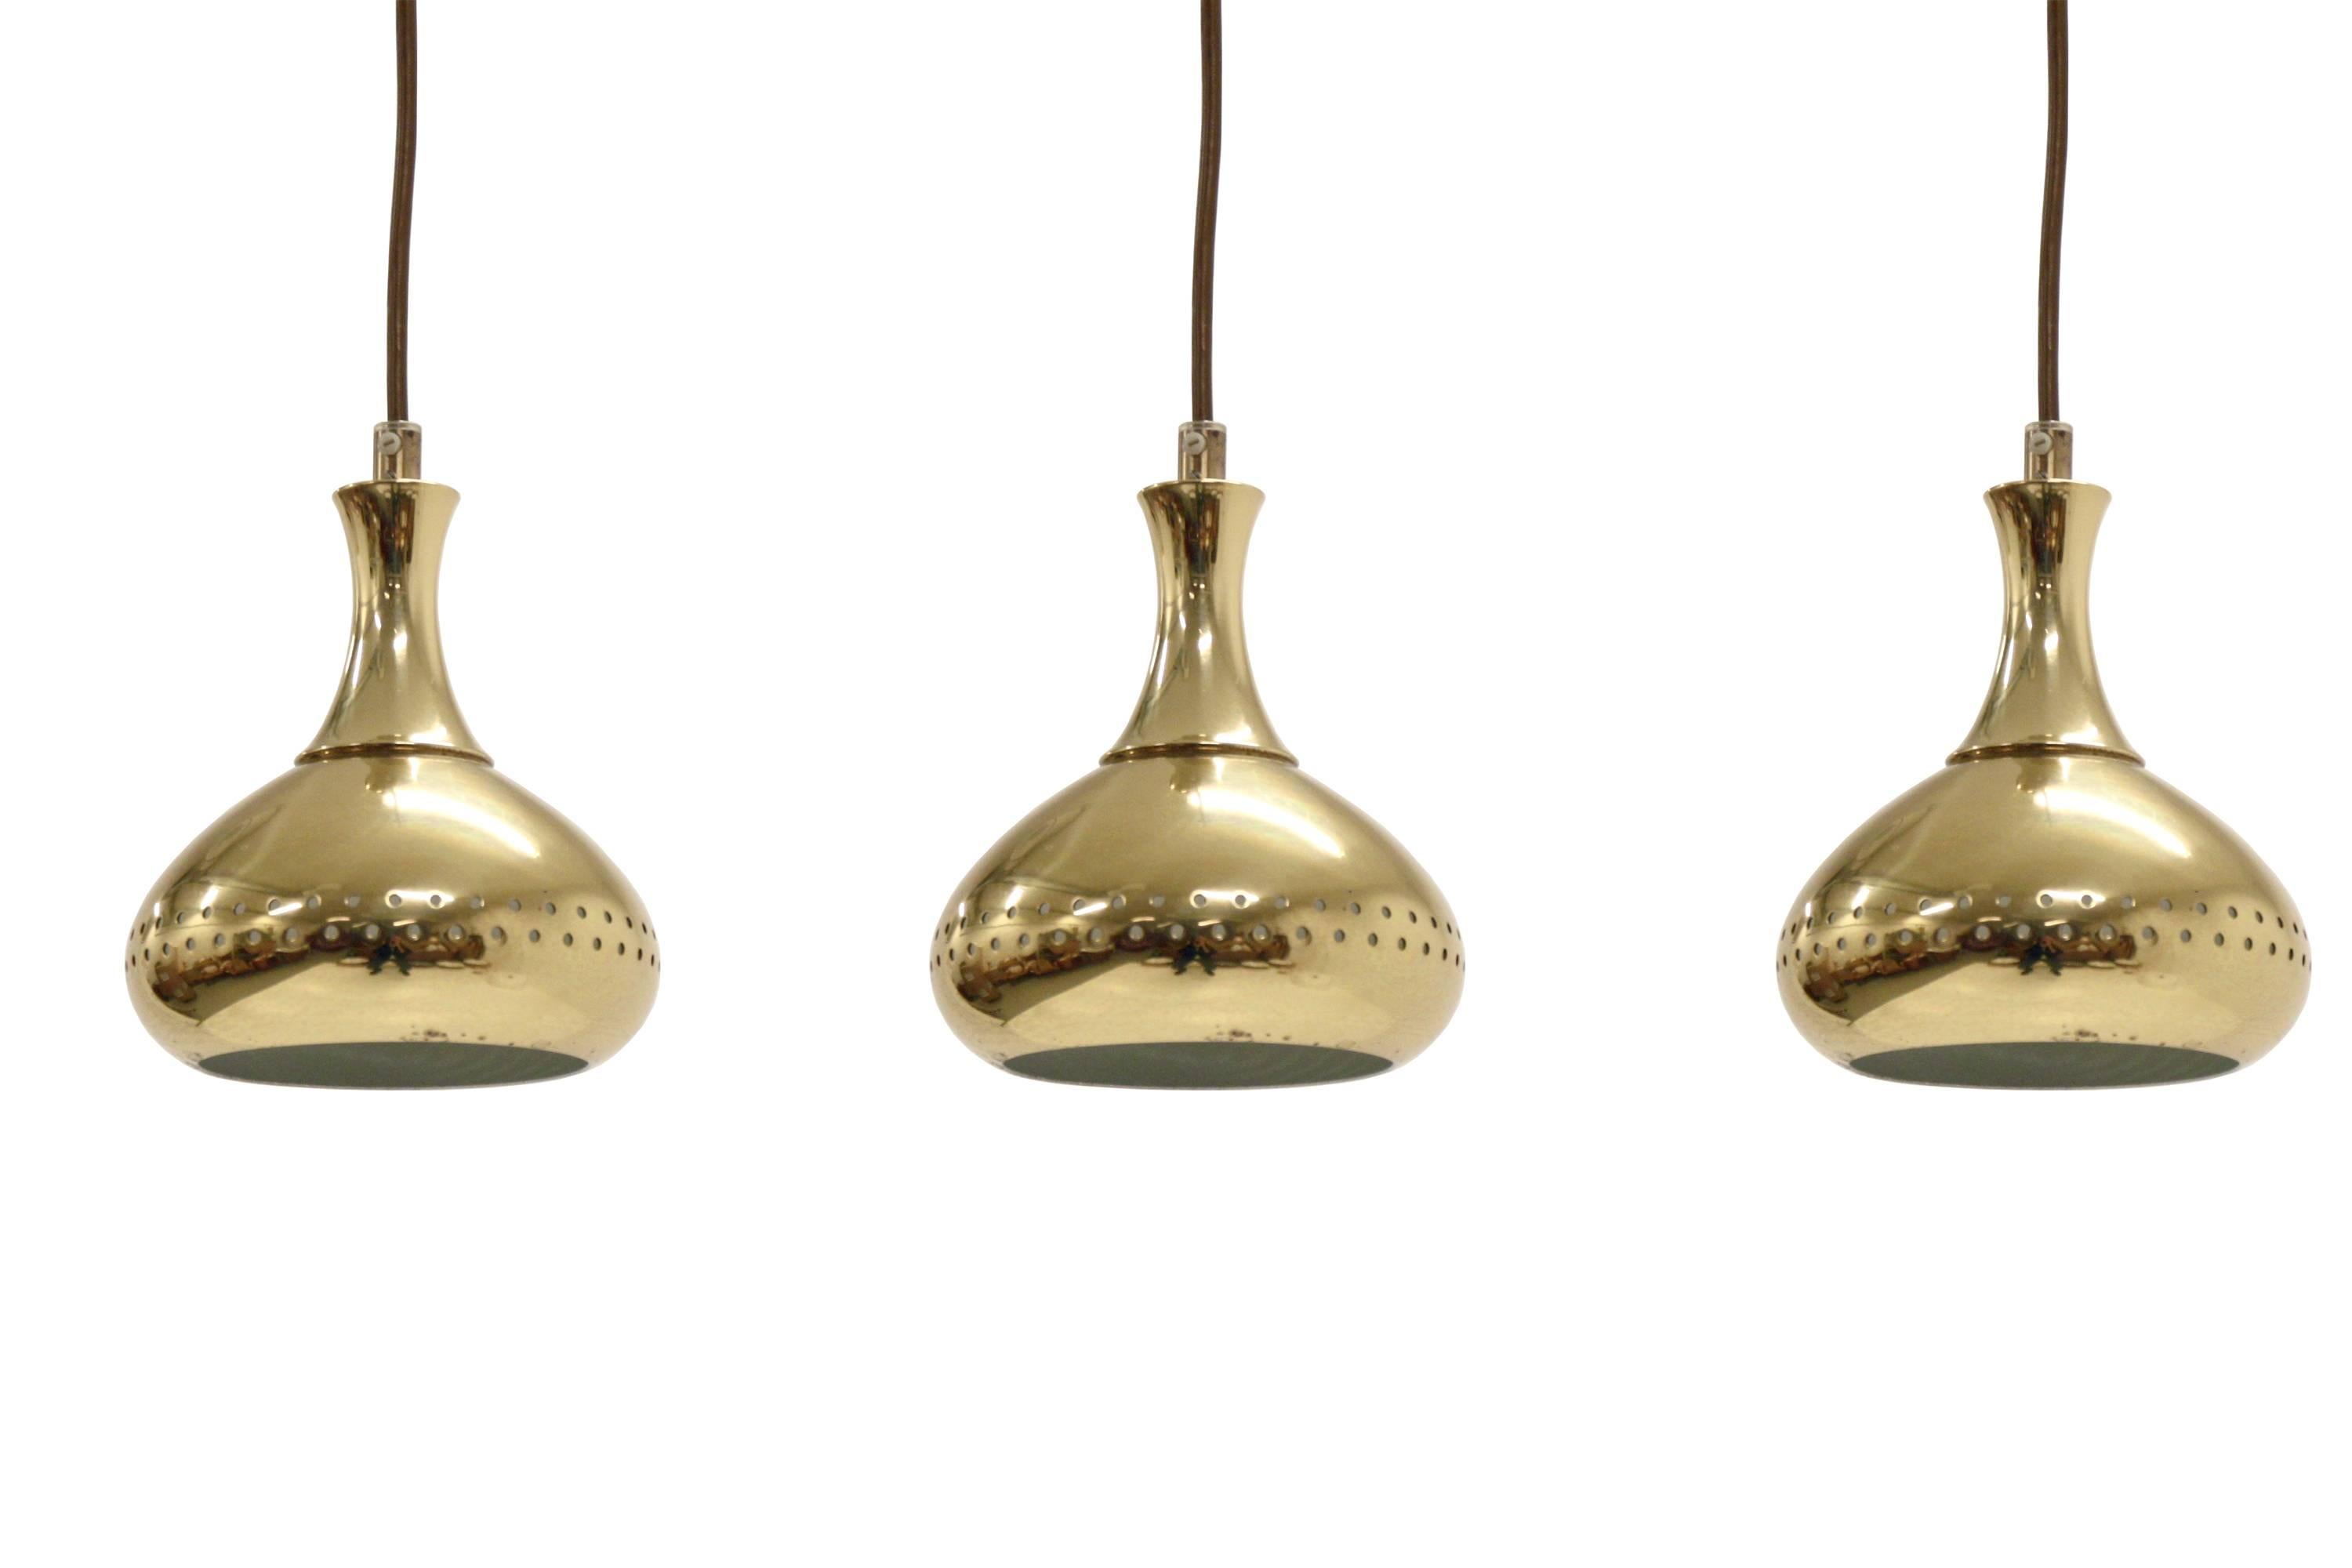 Set of seven drop shaped ceiling pendants on a brass frame.

Attributed to Hans Agne Jakobsson from circa 1960s second half.

All lamps are very well made and fully working. They are in good vintage condition with minor wear.